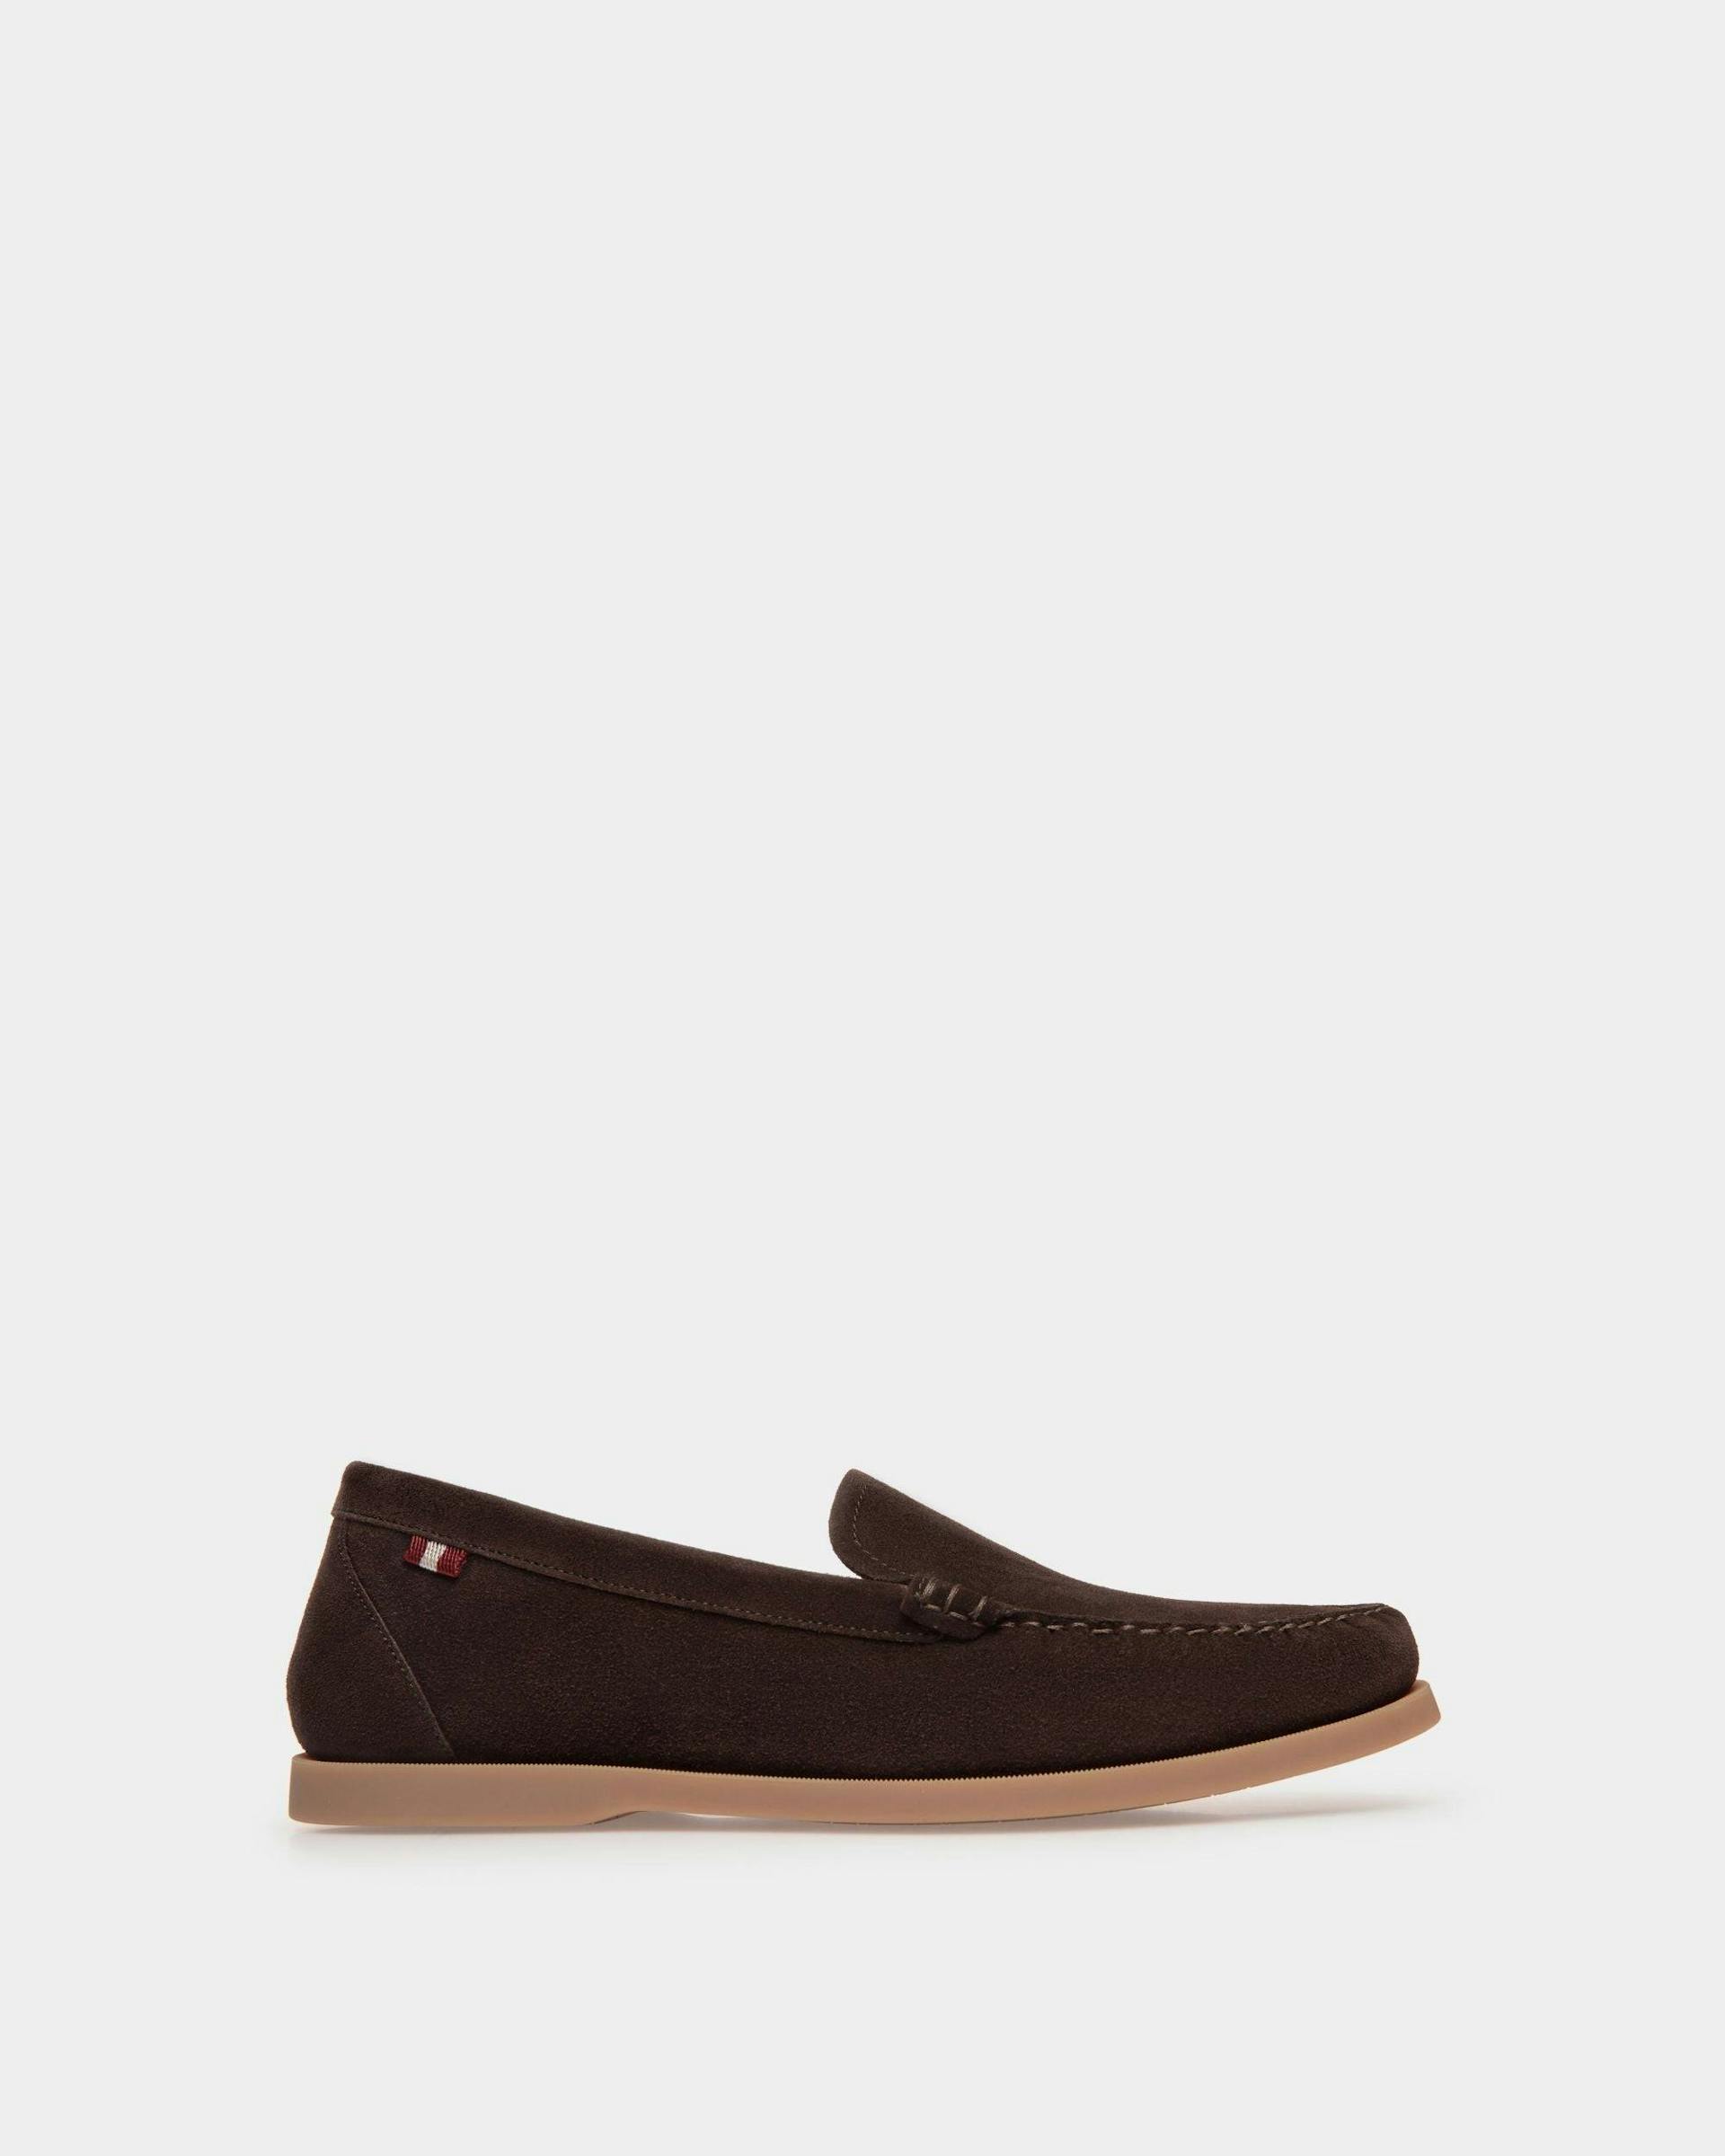 Men's Nelson Loafer in Brown Suede | Bally | Still Life Side